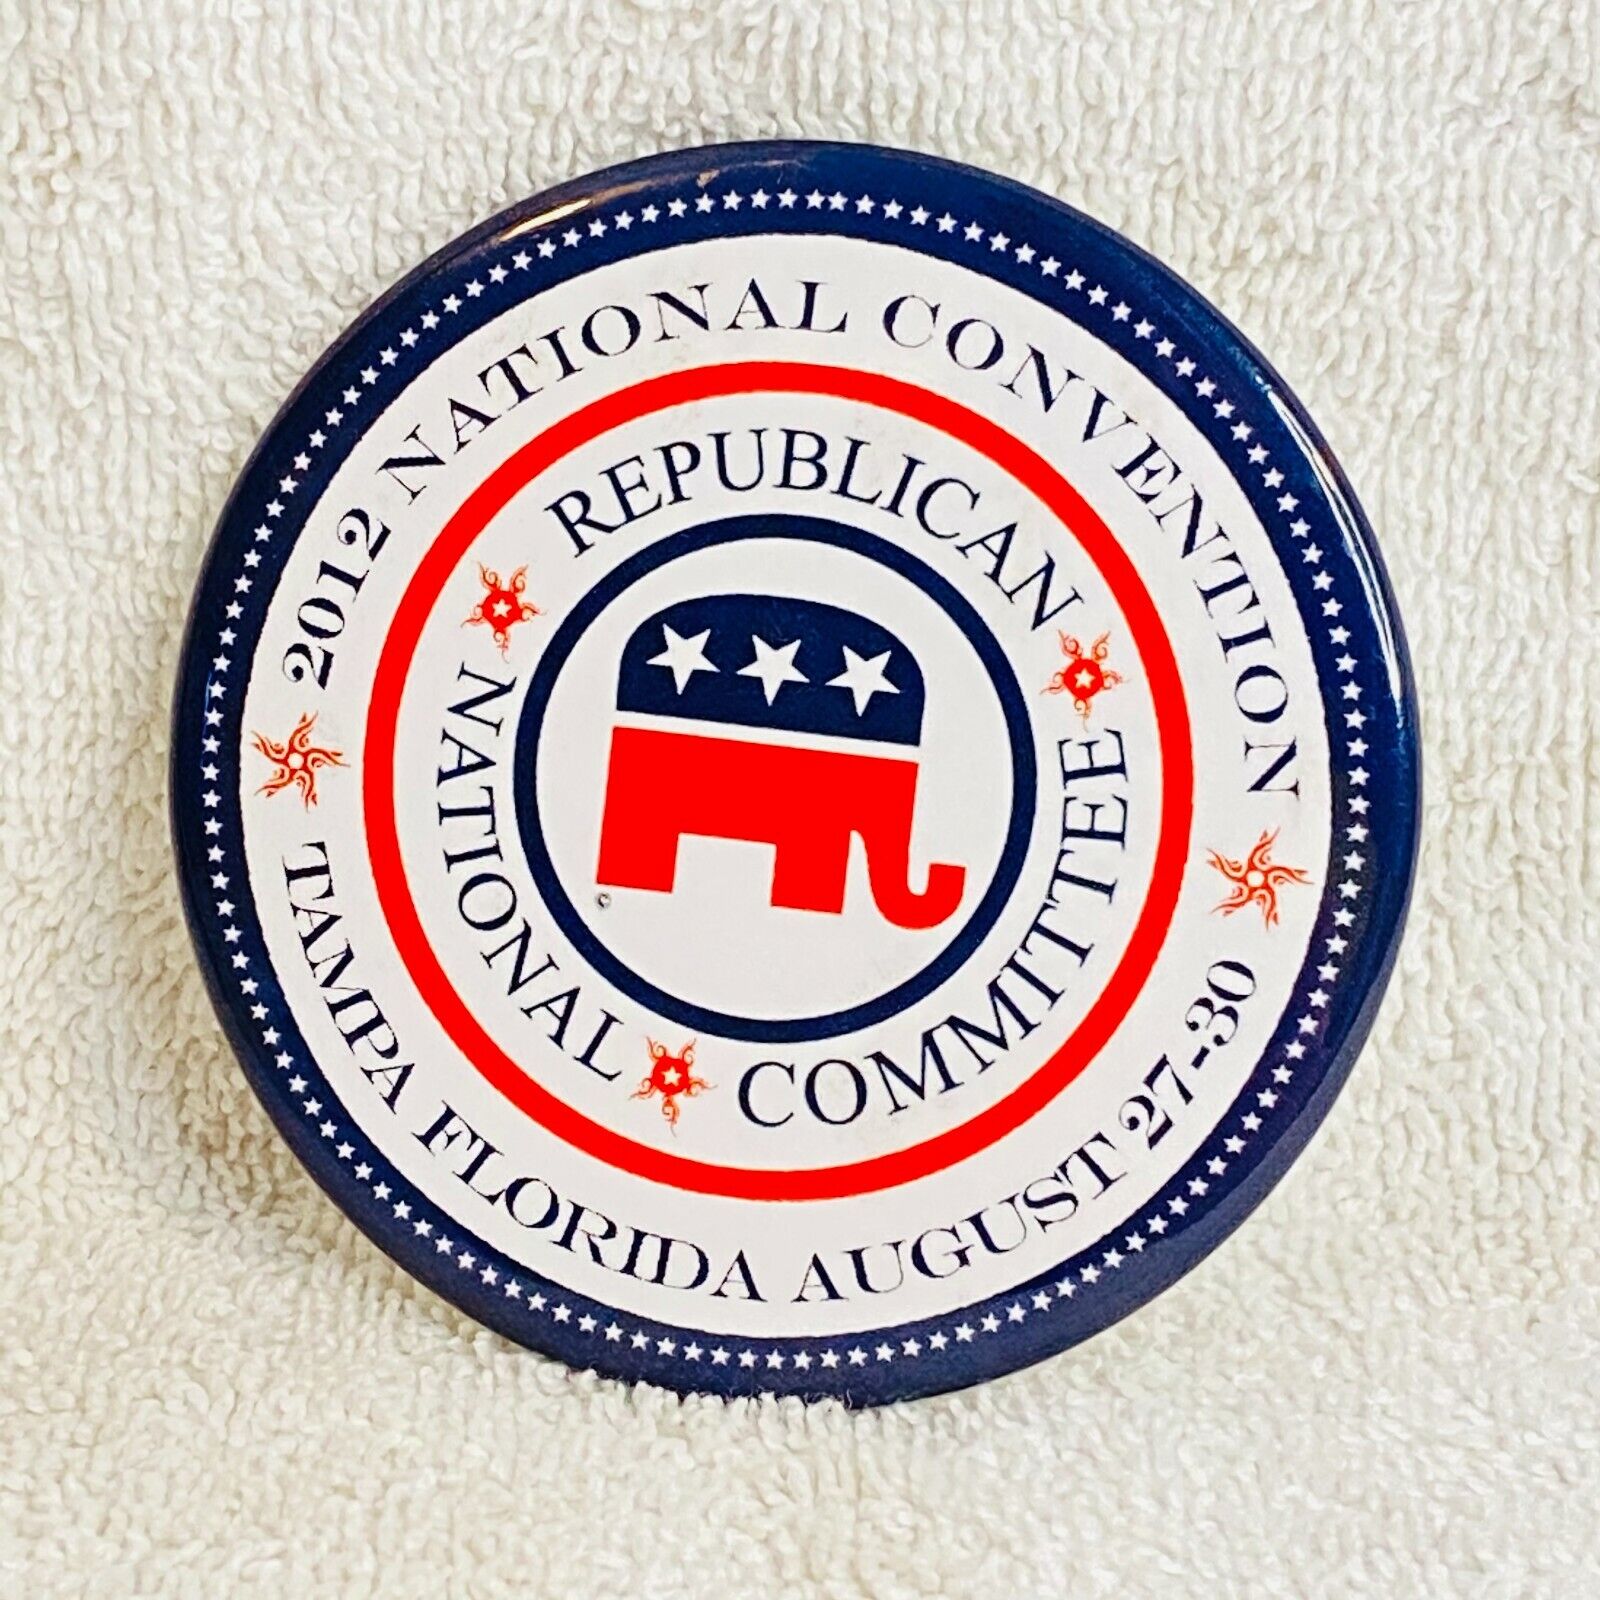 2012 National Convention Tampa Florida August 27-30 Political Button Republican